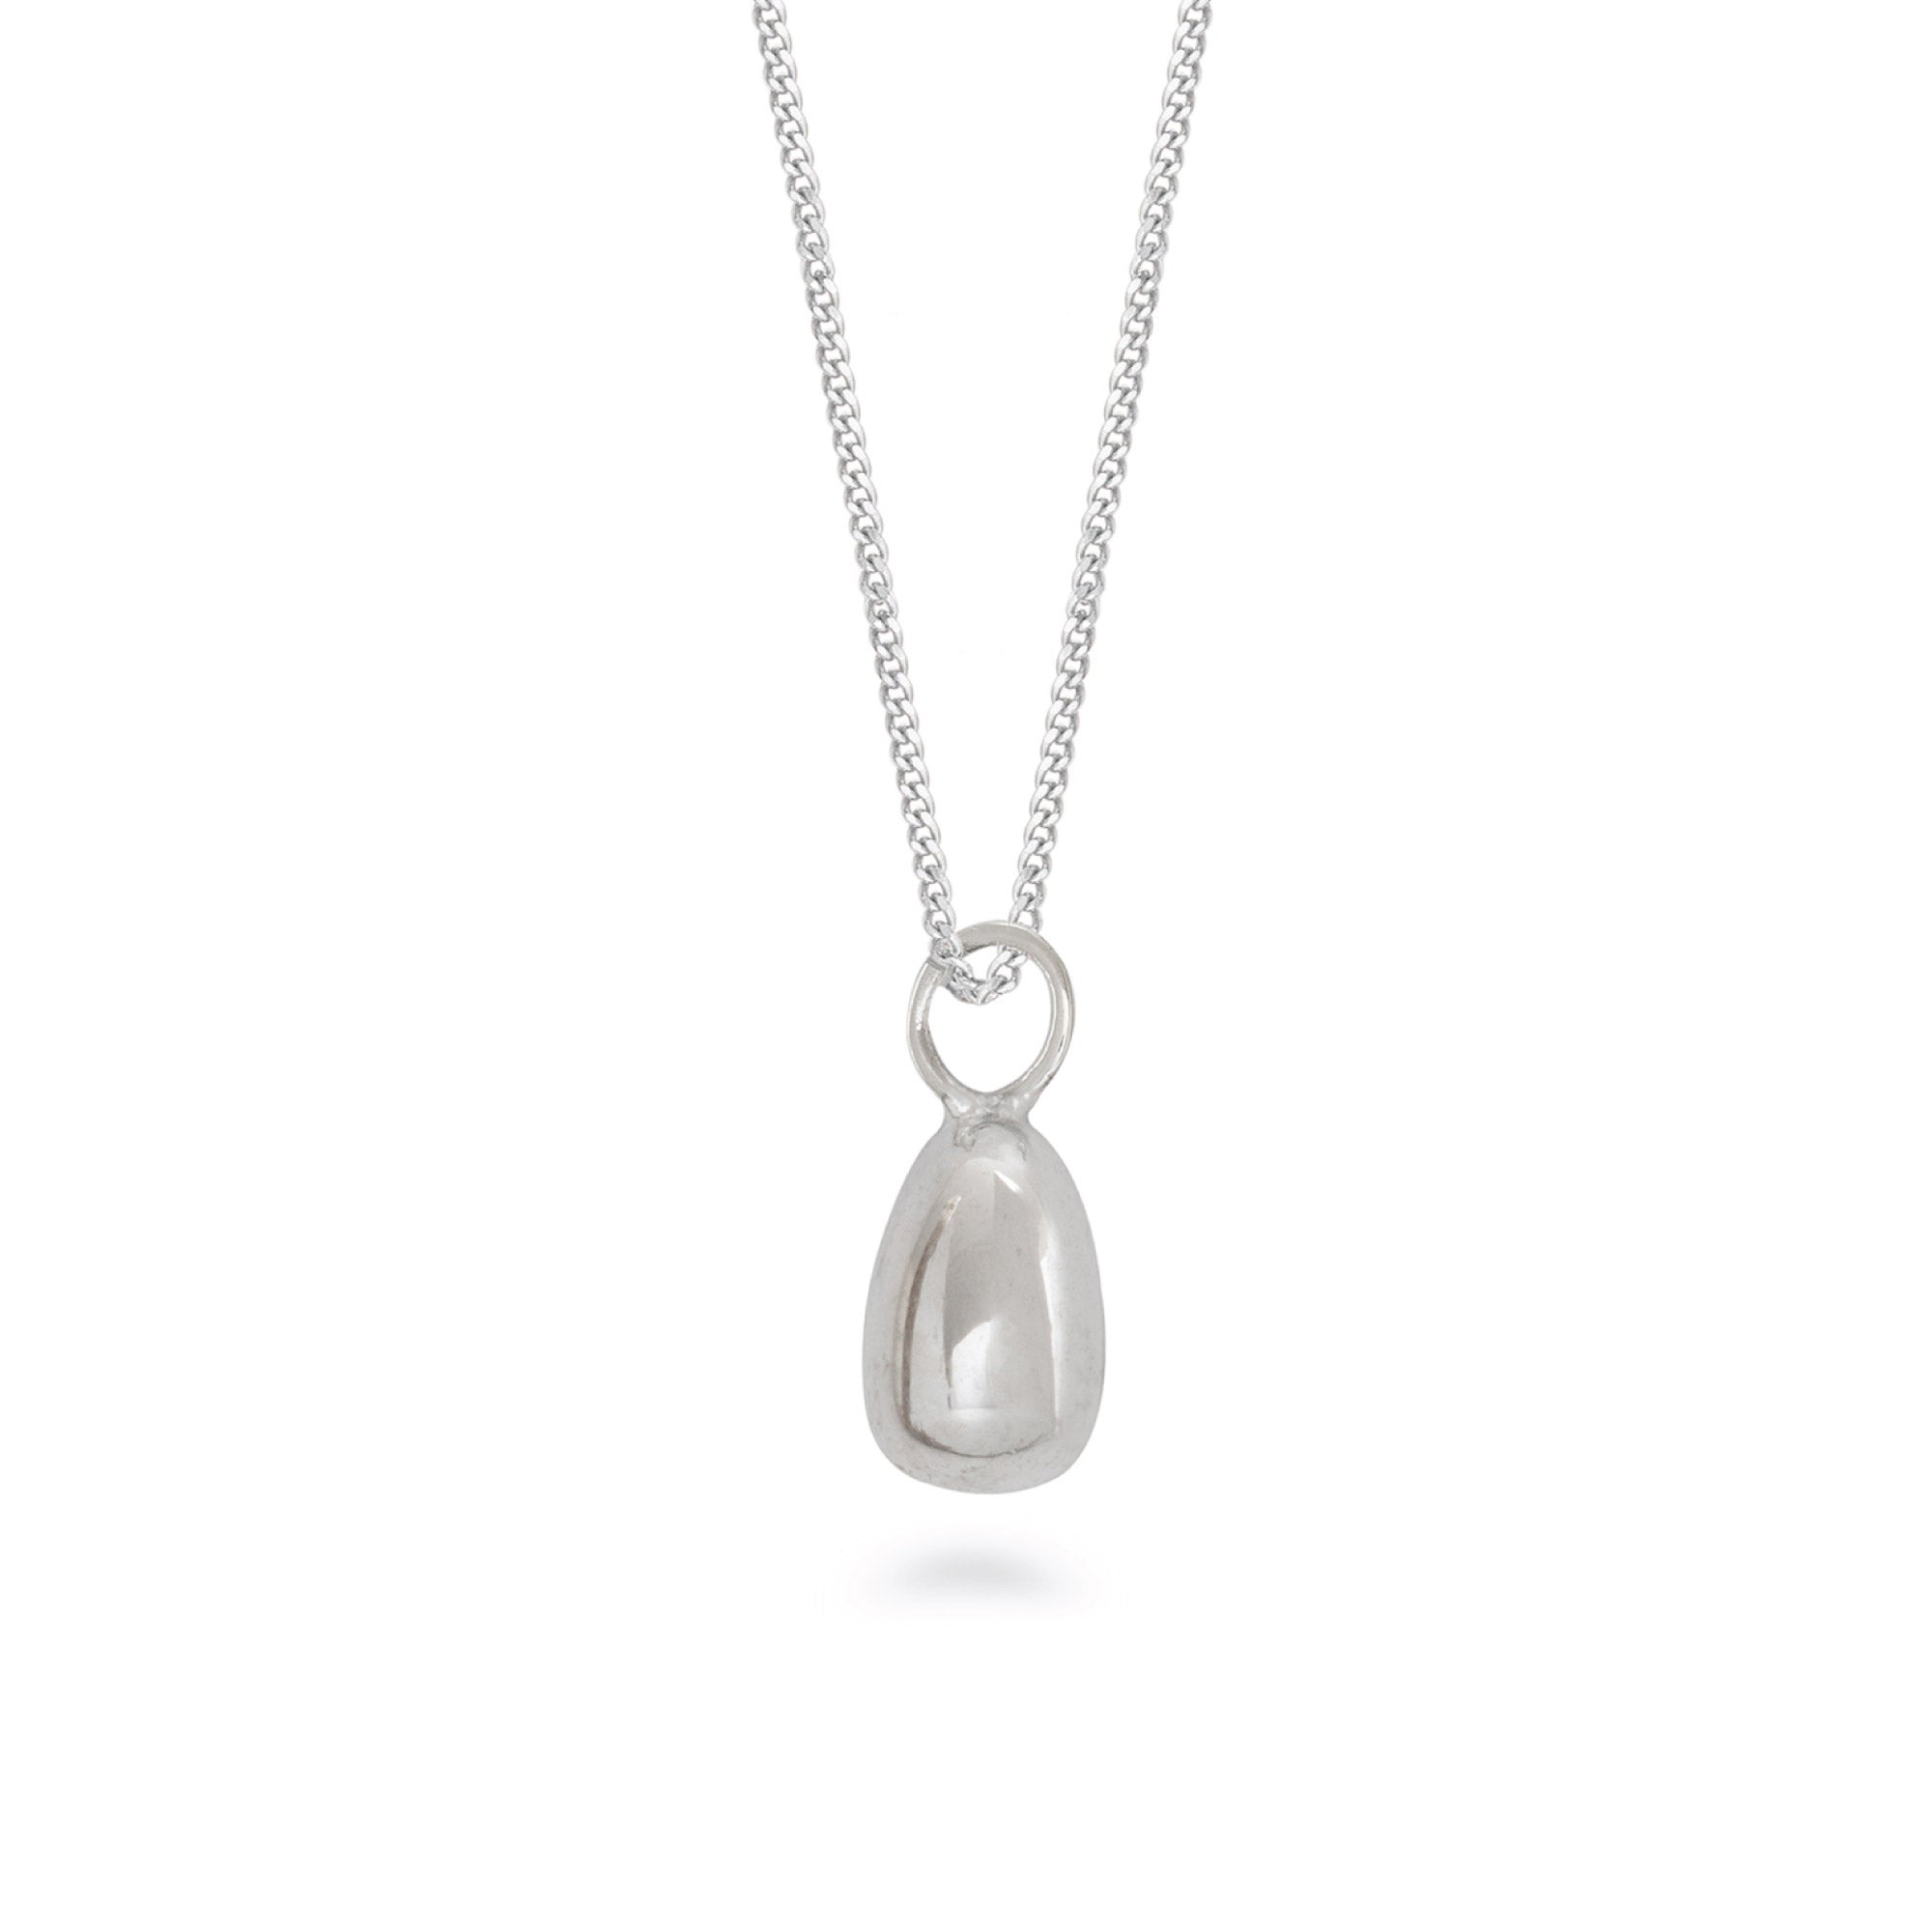 Egg Pendant Necklace Sterling Silver